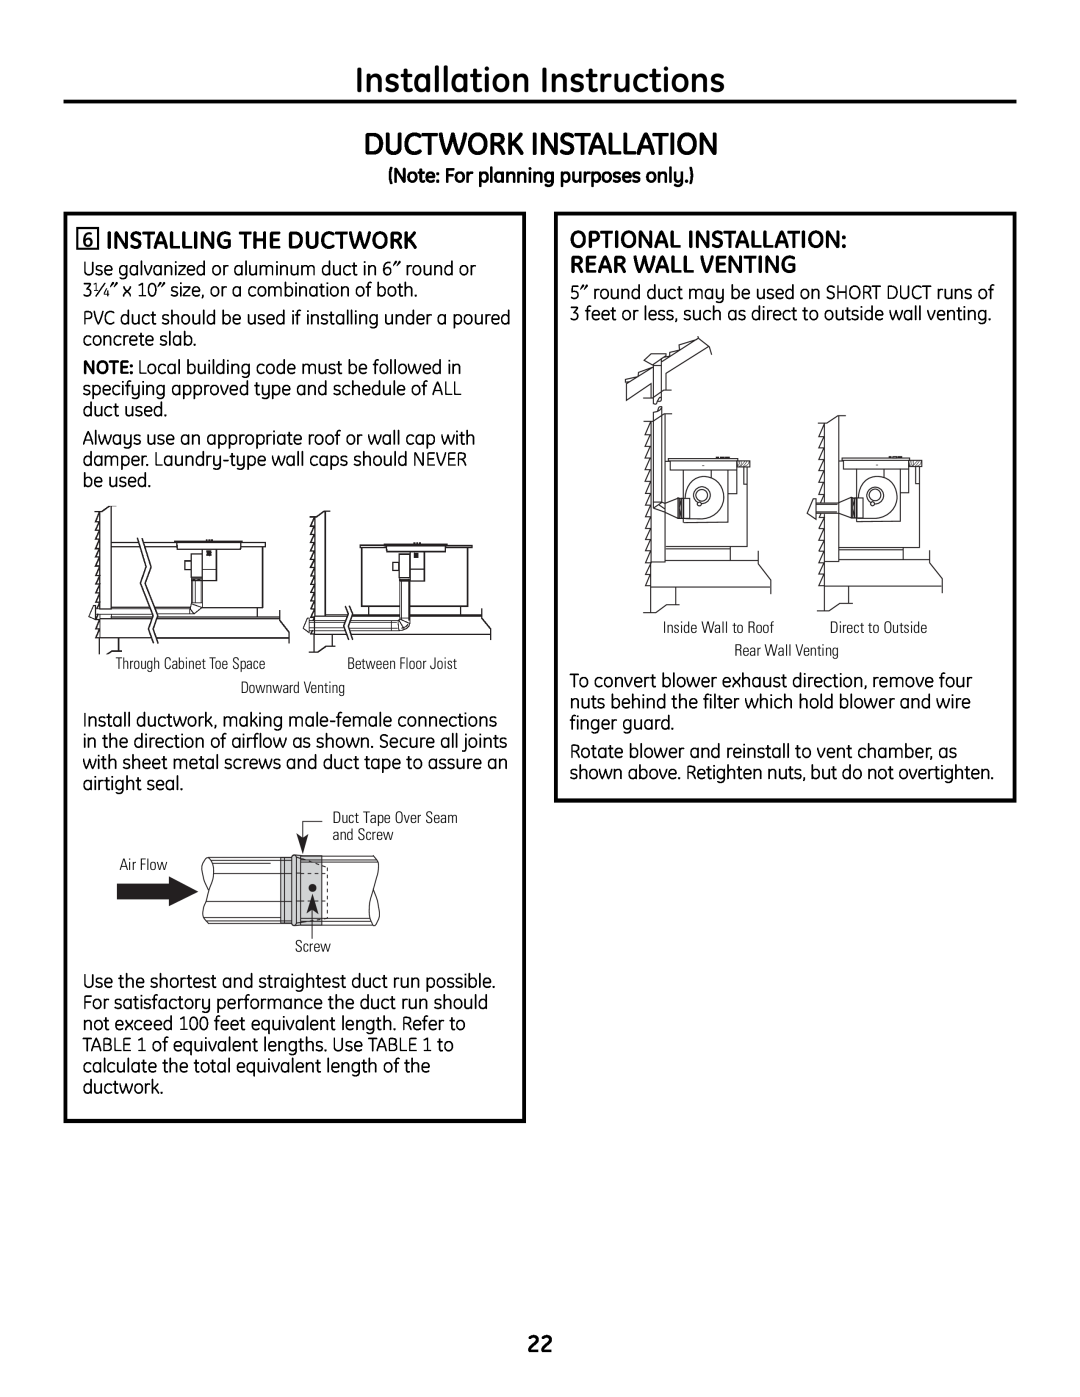 GE PGP989 manual Ductwork Installation, Installation Instructions, 6INSTALLING THE DUCTWORK 